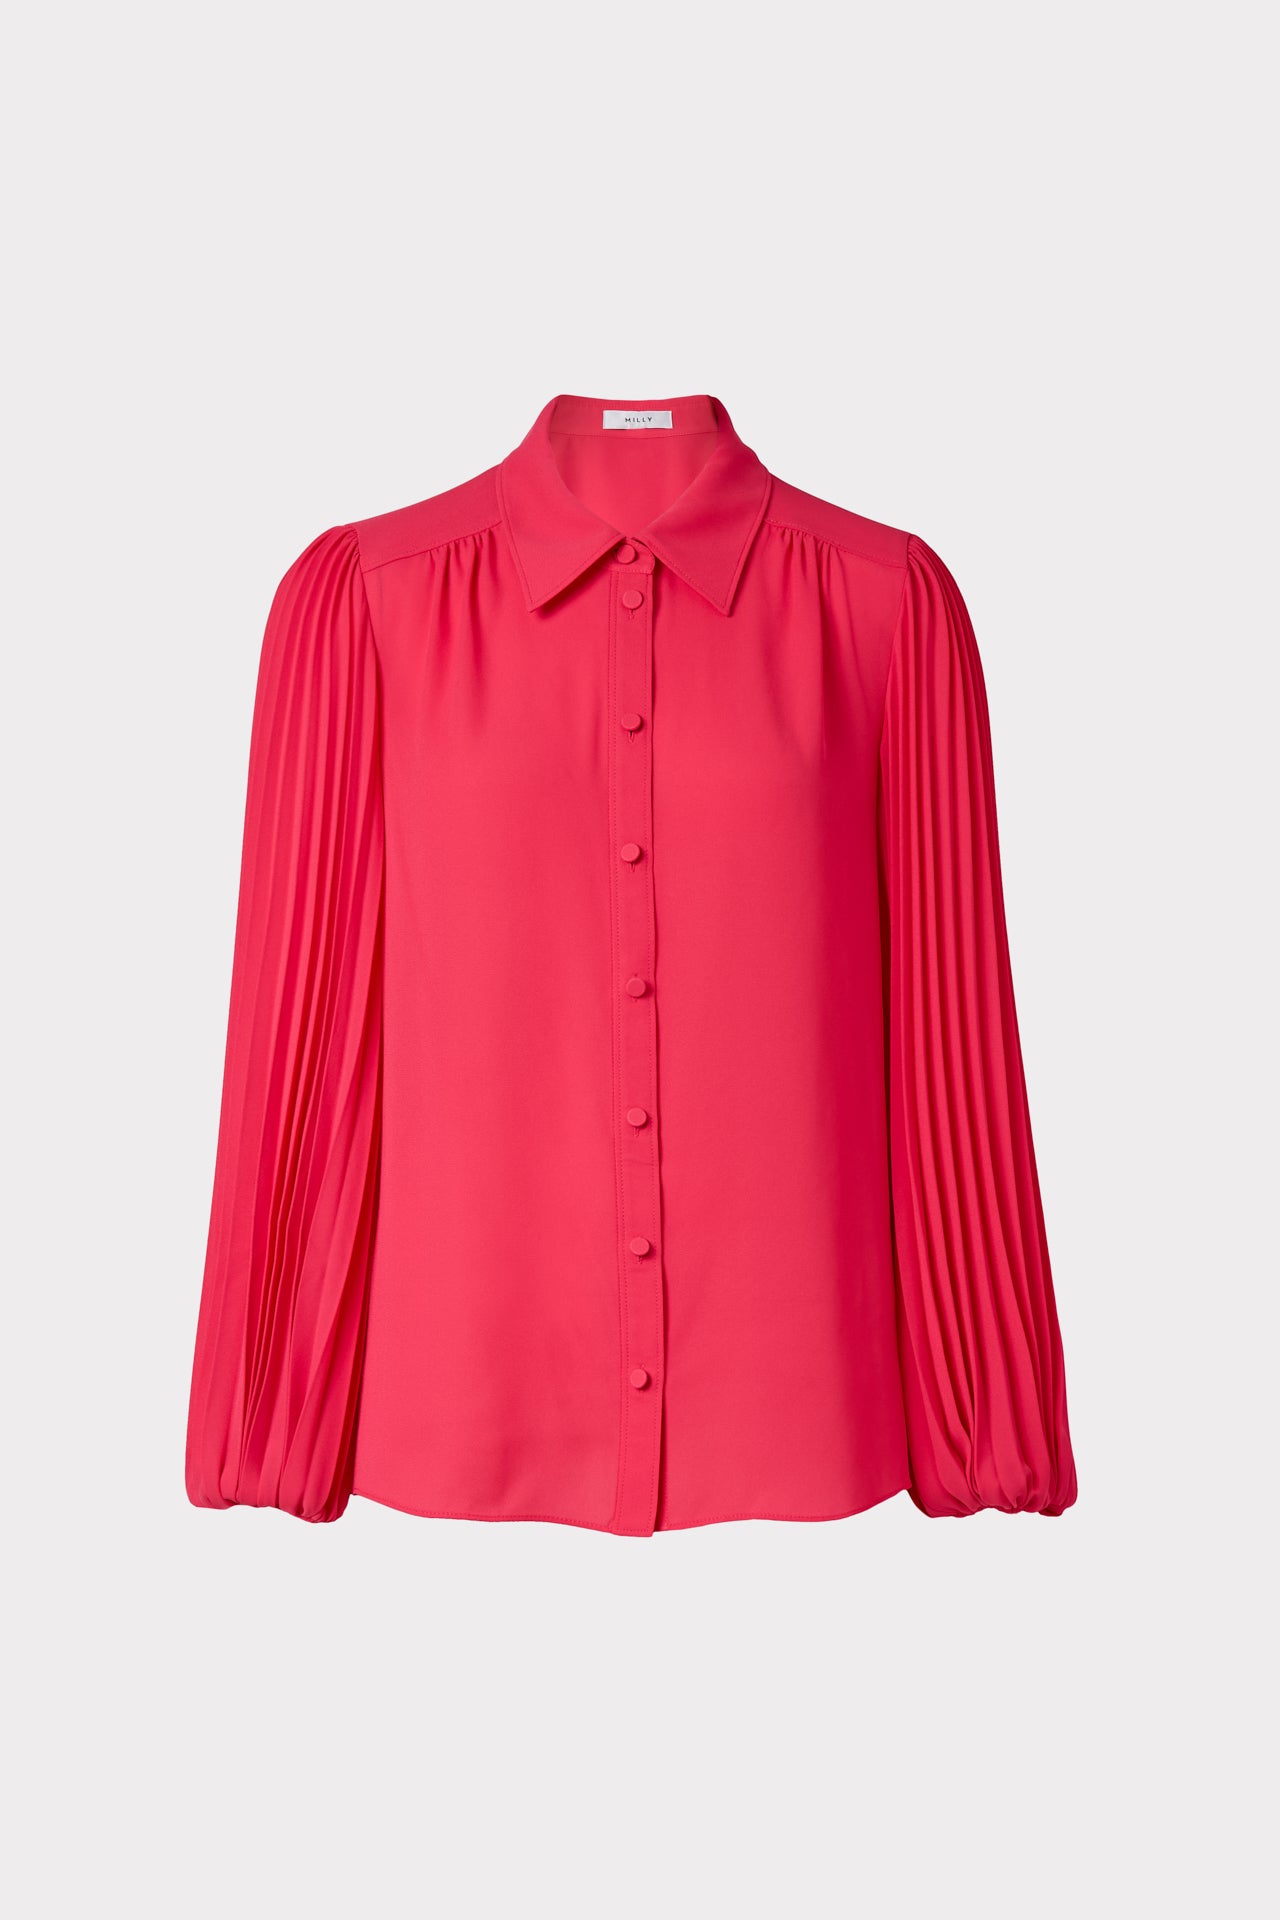 MILLY LINA PLEATED BLOUSE